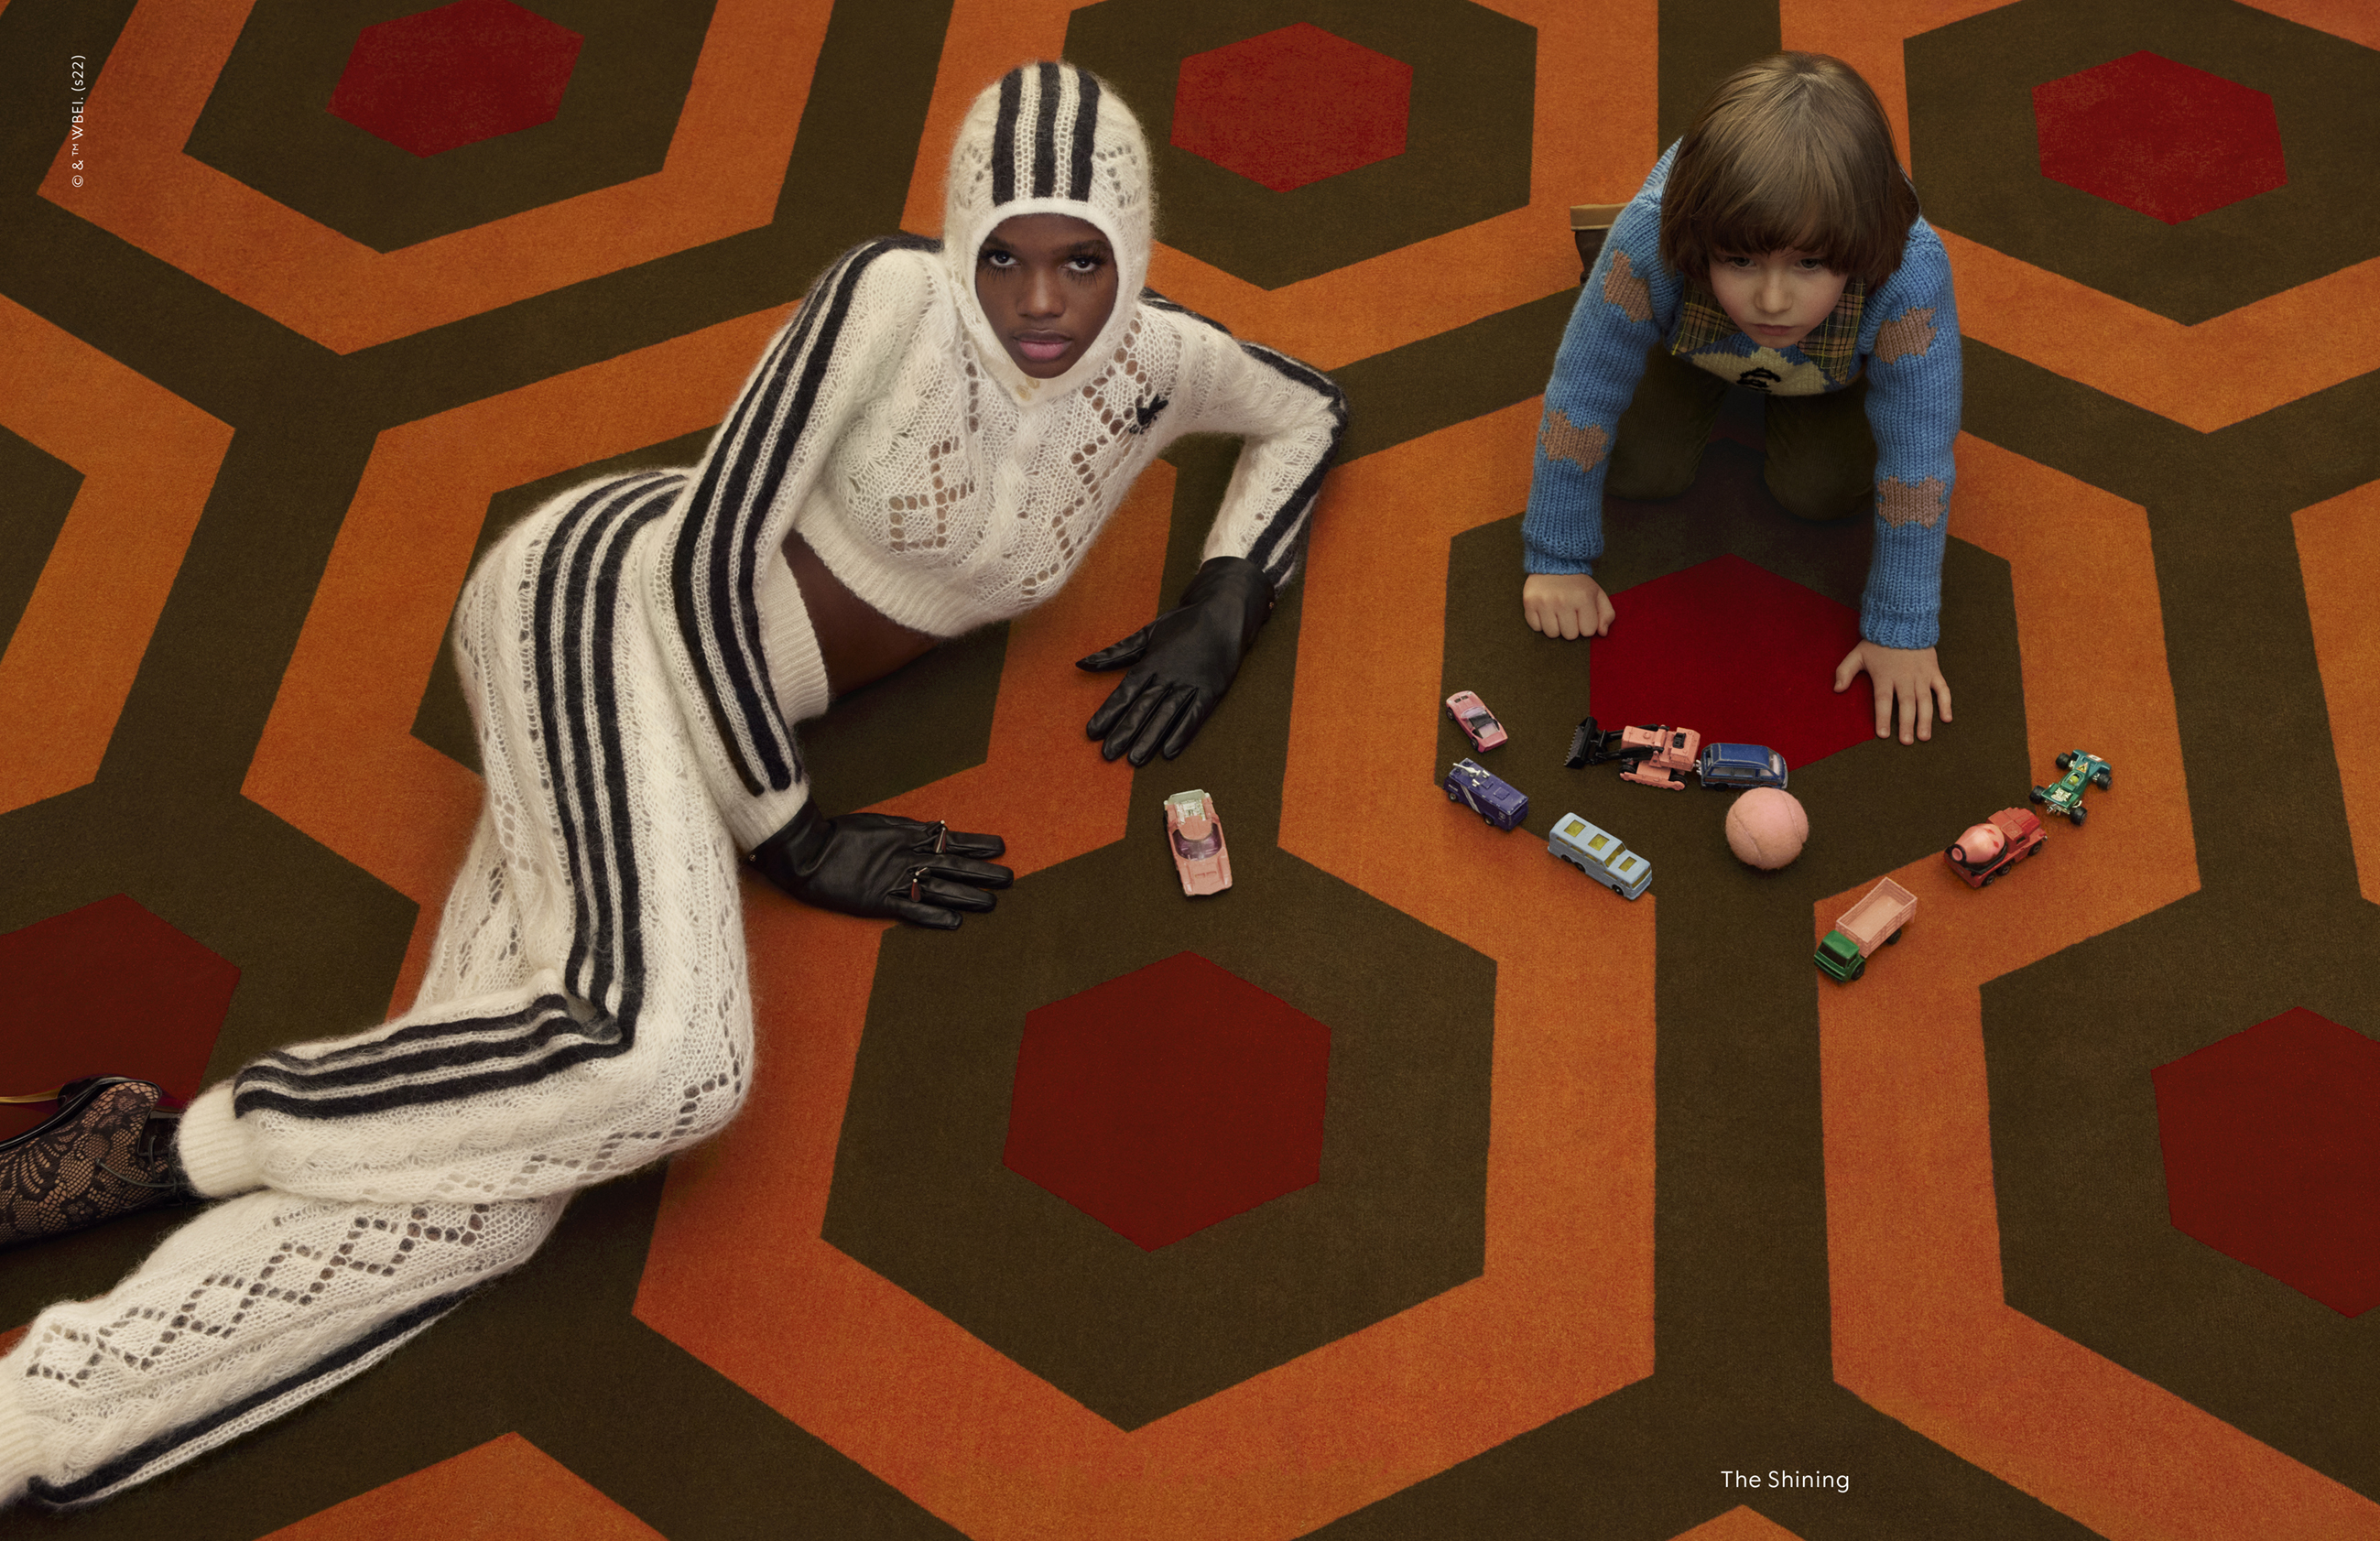 gucci aw22 campaign imagery by Mert Alas and Marcus Piggott